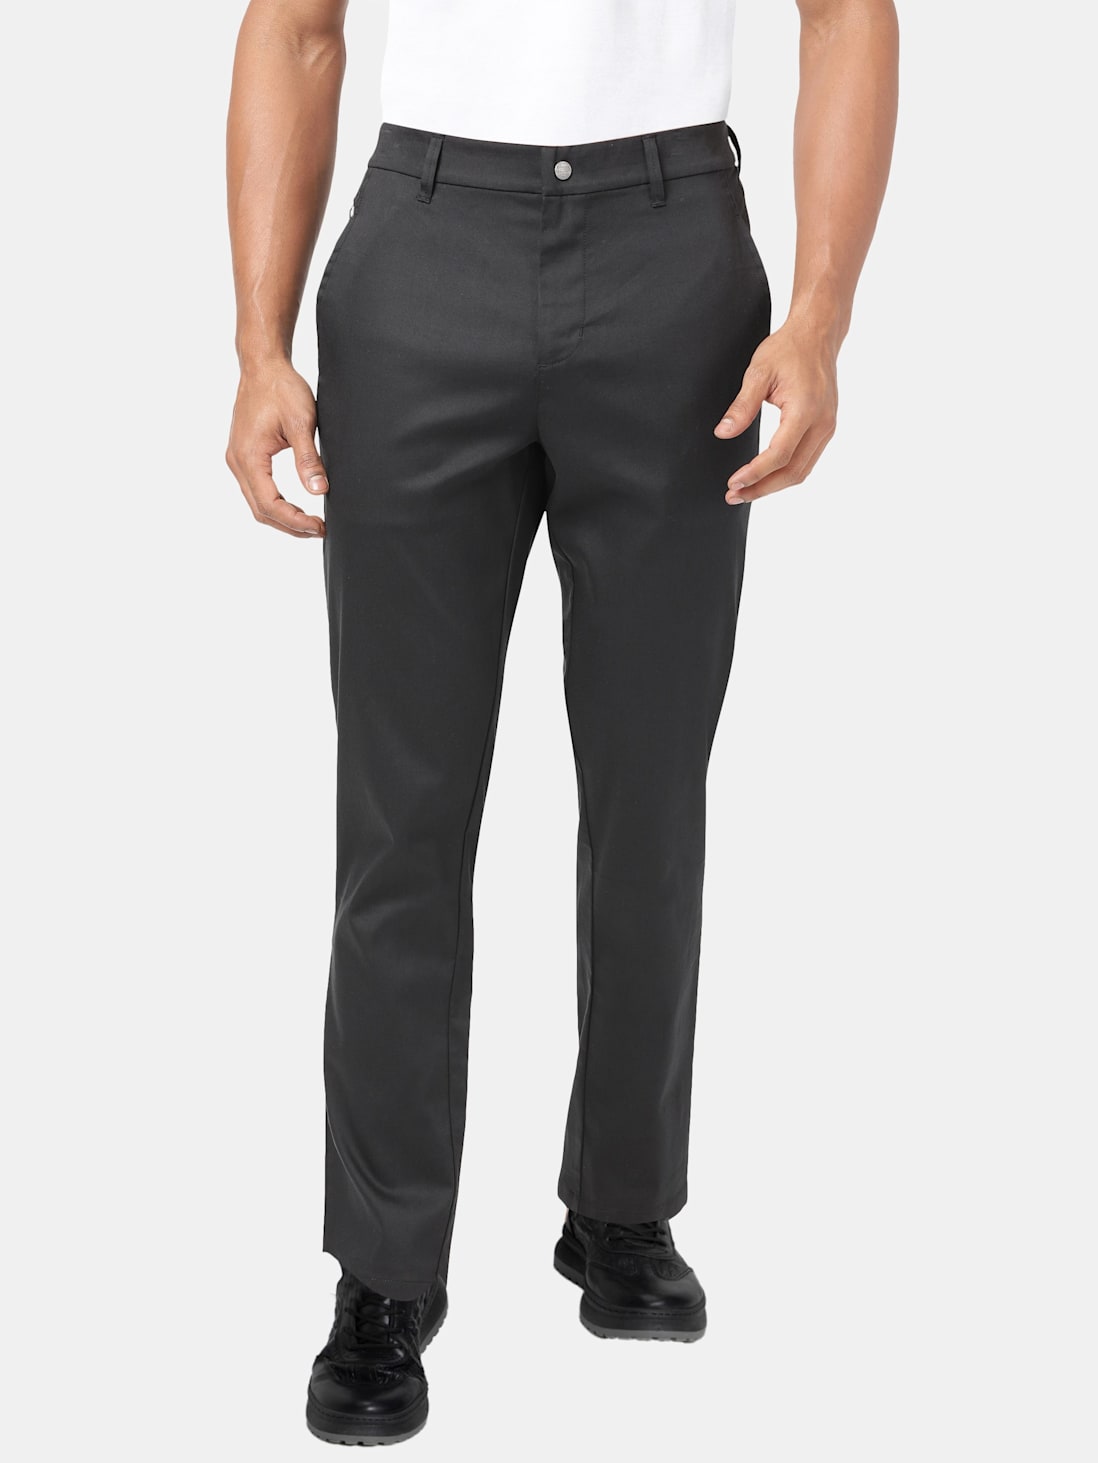 Buy Olive Trousers & Pants for Men by UNITED COLORS OF BENETTON Online |  Ajio.com